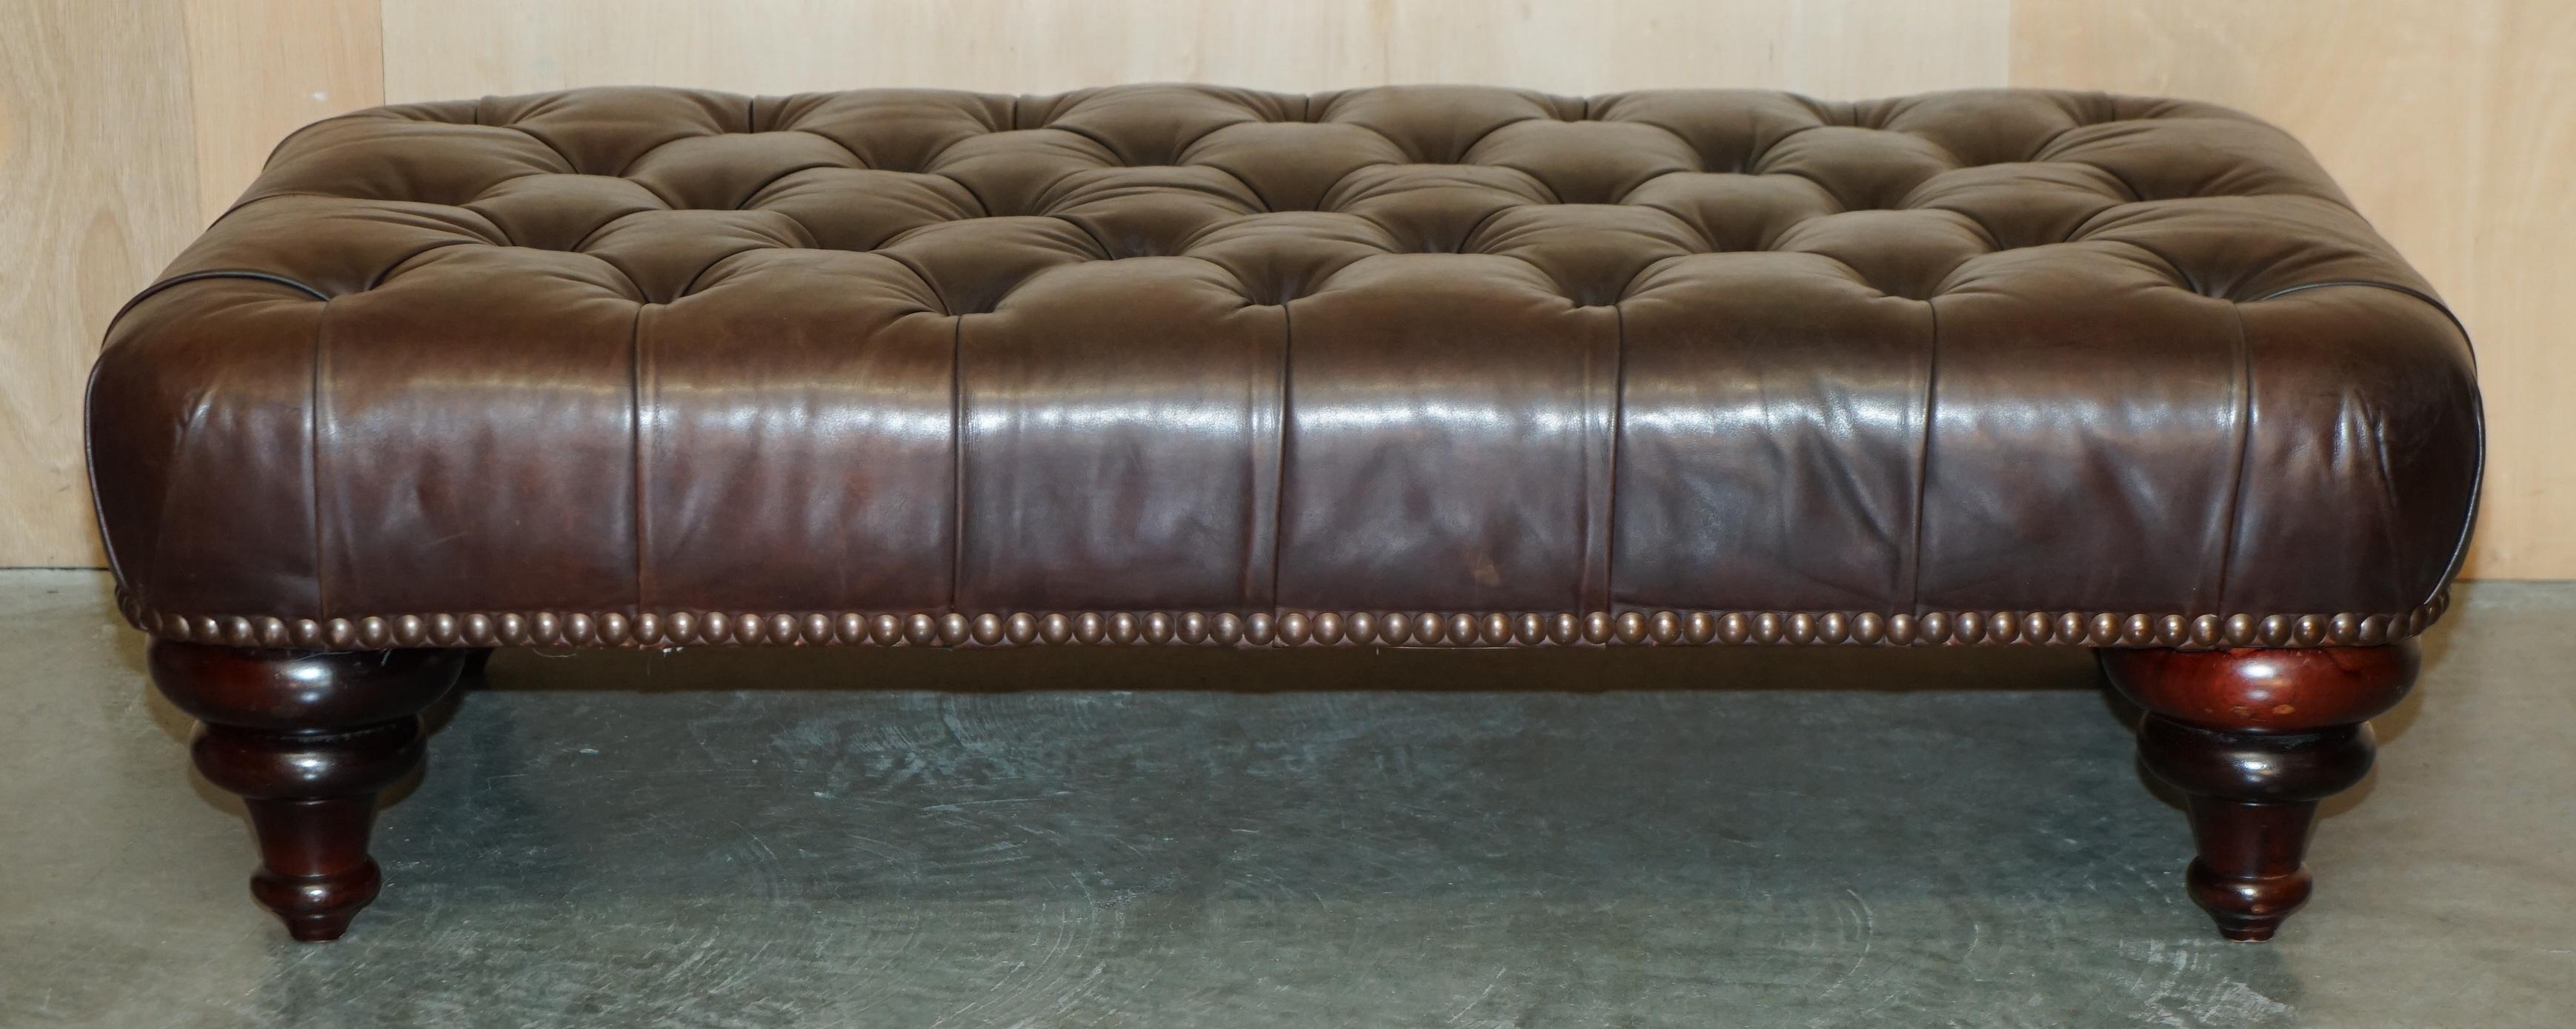 STUNNiNG HAND DYED BROWN LEATHER GEORGE SMITH CHESTERFIELD TUFTED FOOTSTOOL 9